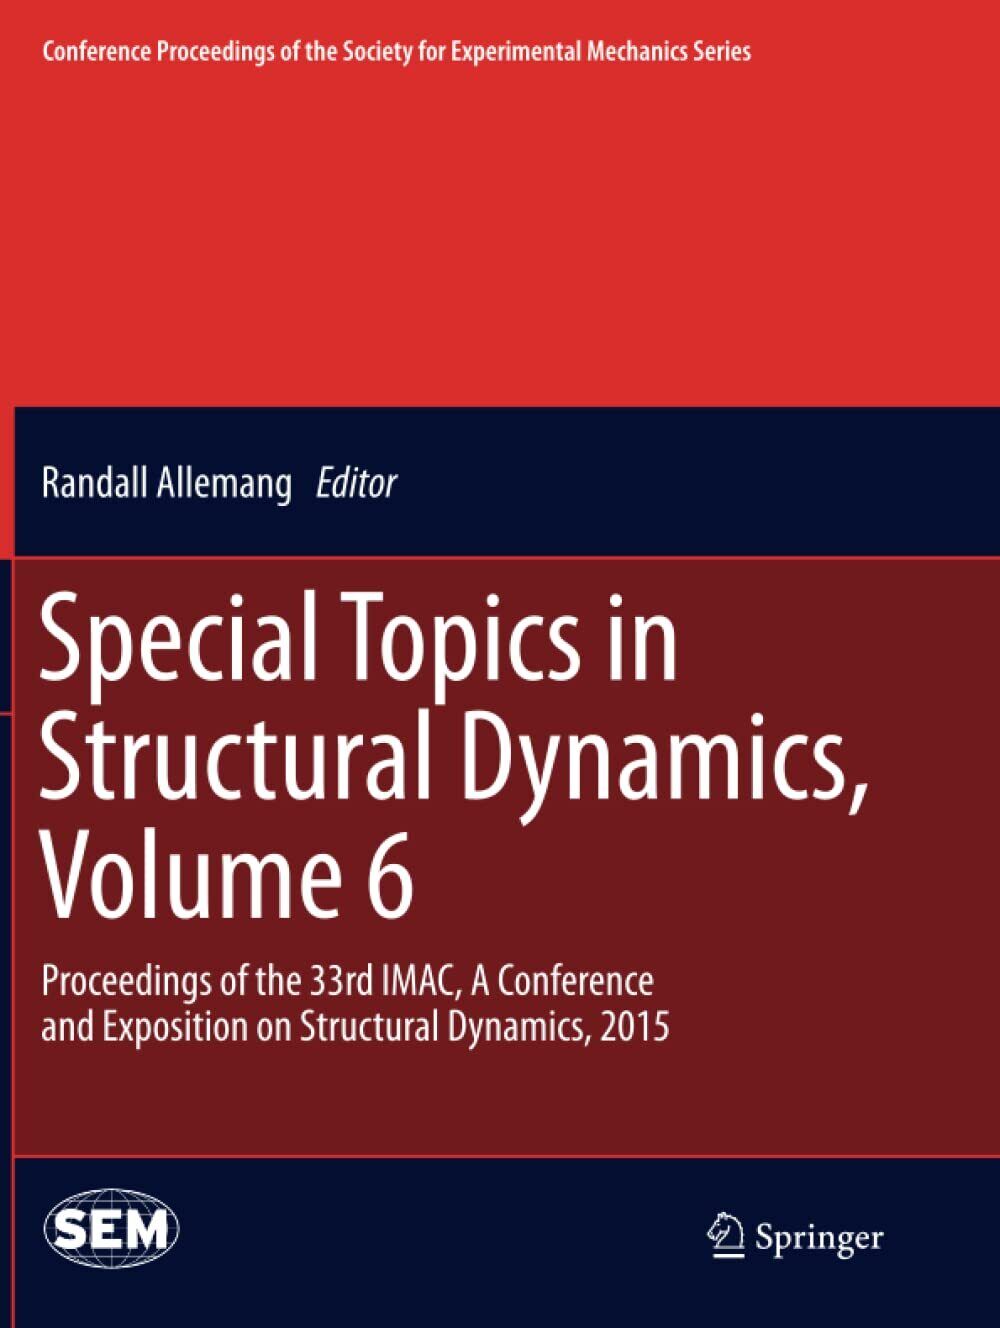 Special Topics in Structural Dynamics, Volume 6 - Randall Allemang, 2016